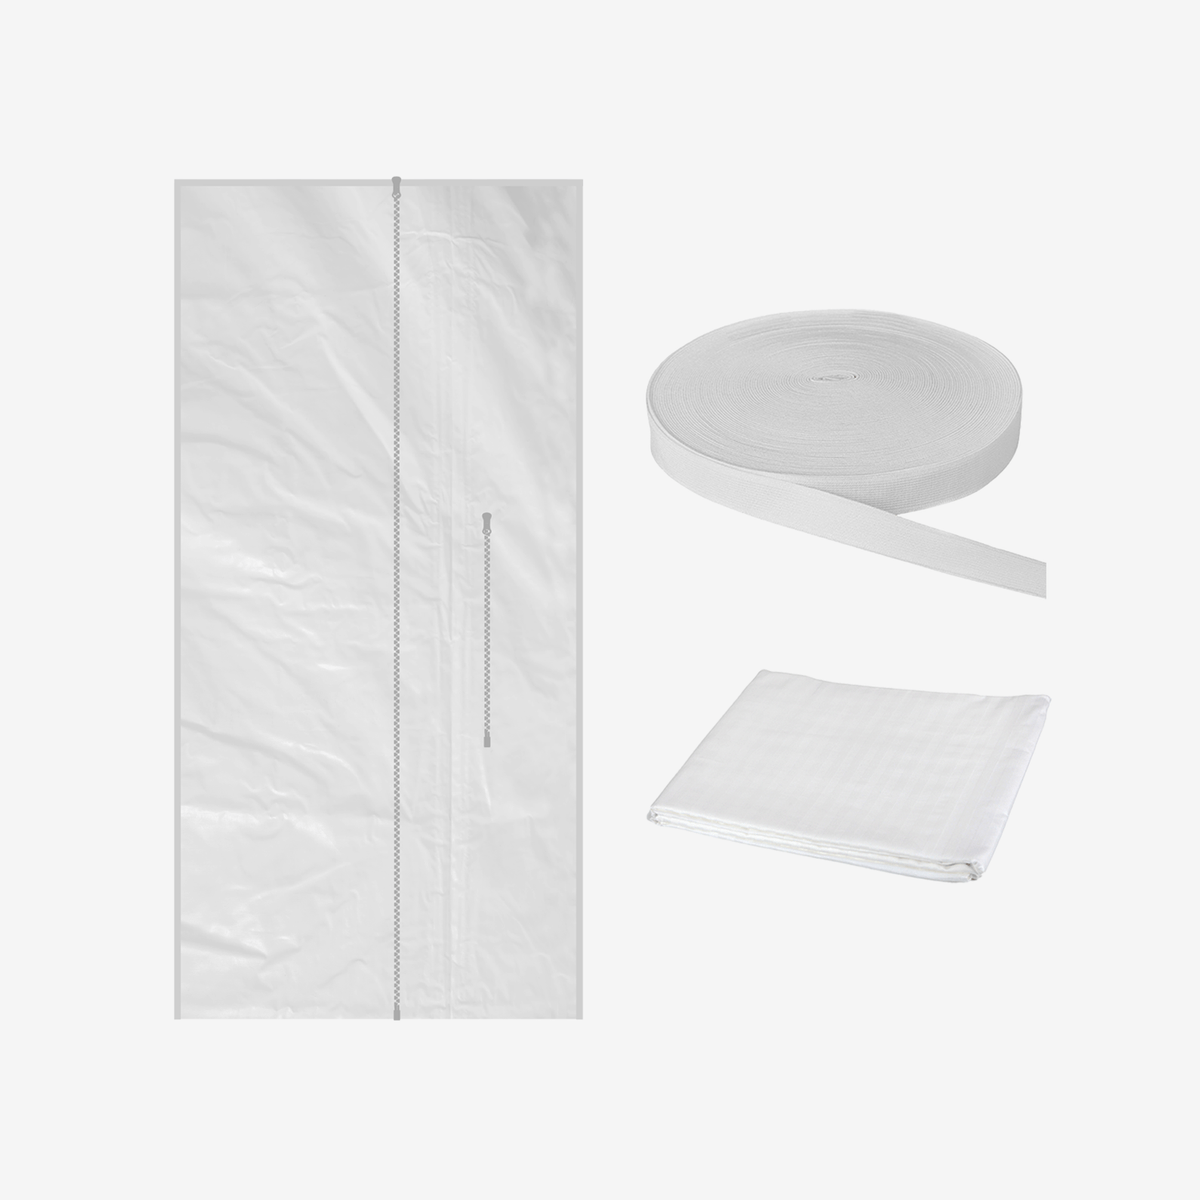 Sliding Door Seal Kit for Portable Air Conditioner and Tumble Dryer - 210 x 90cm